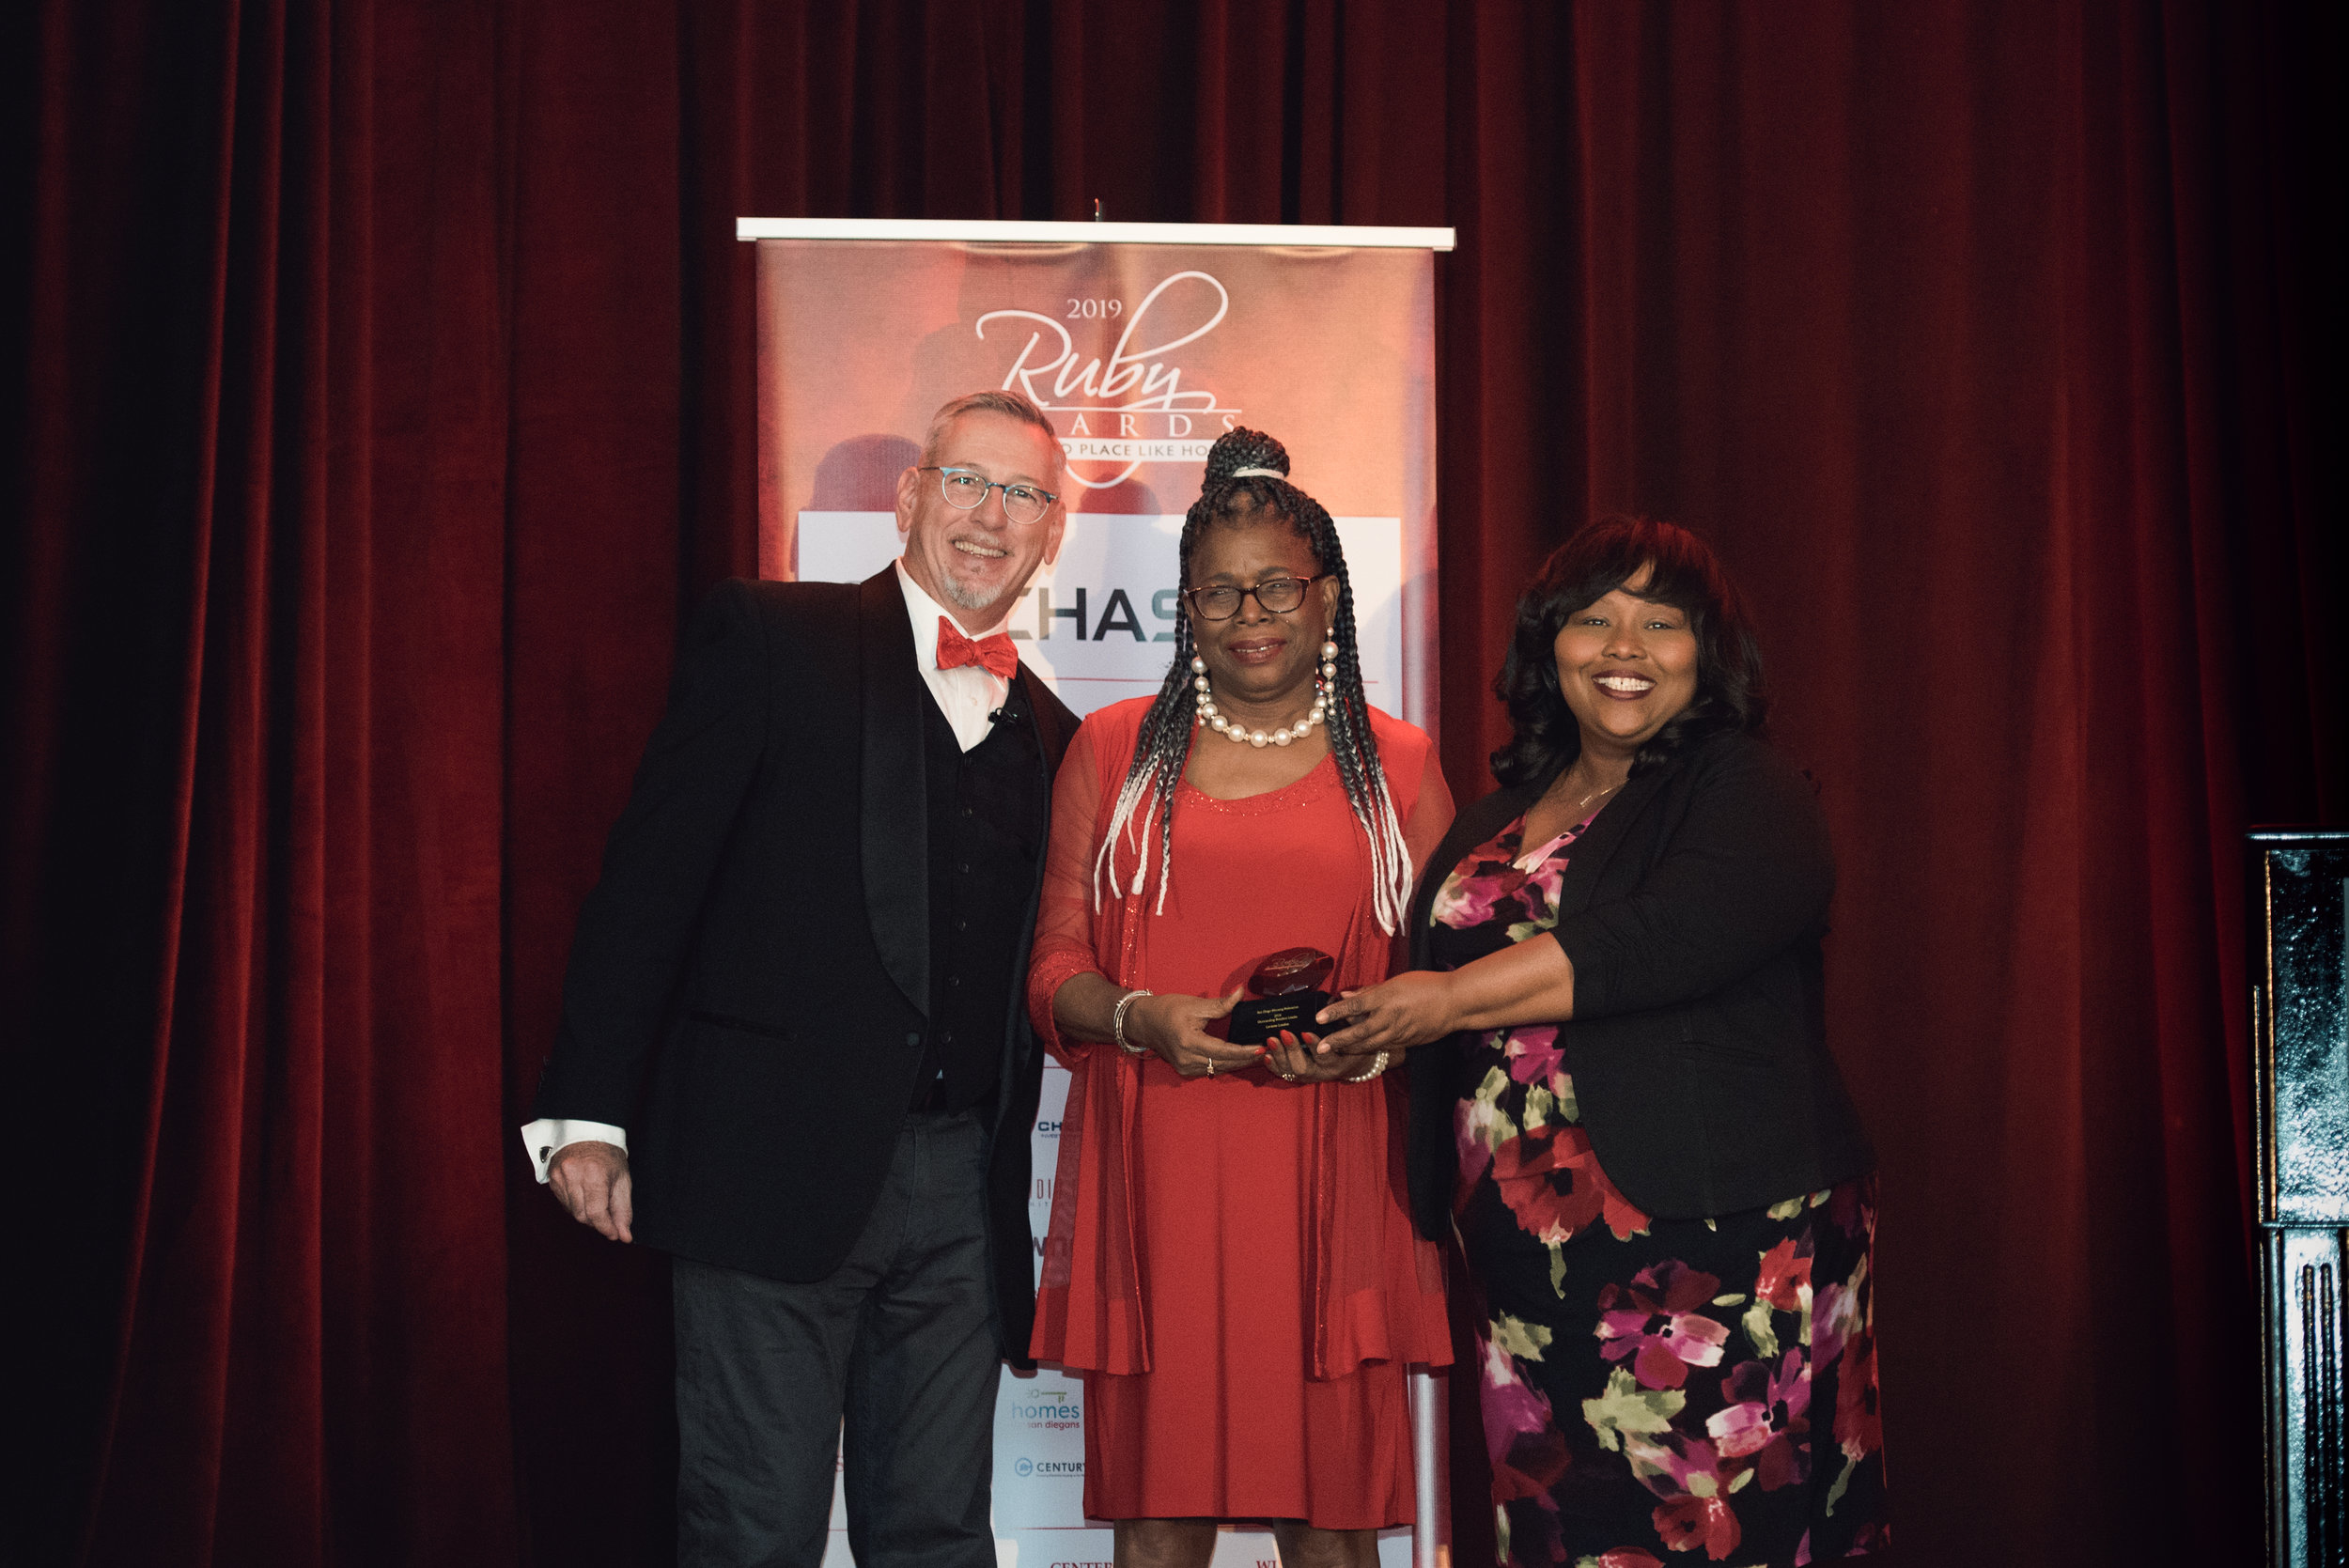 Lavearn London won Outstanding Resident Leader, May 2019